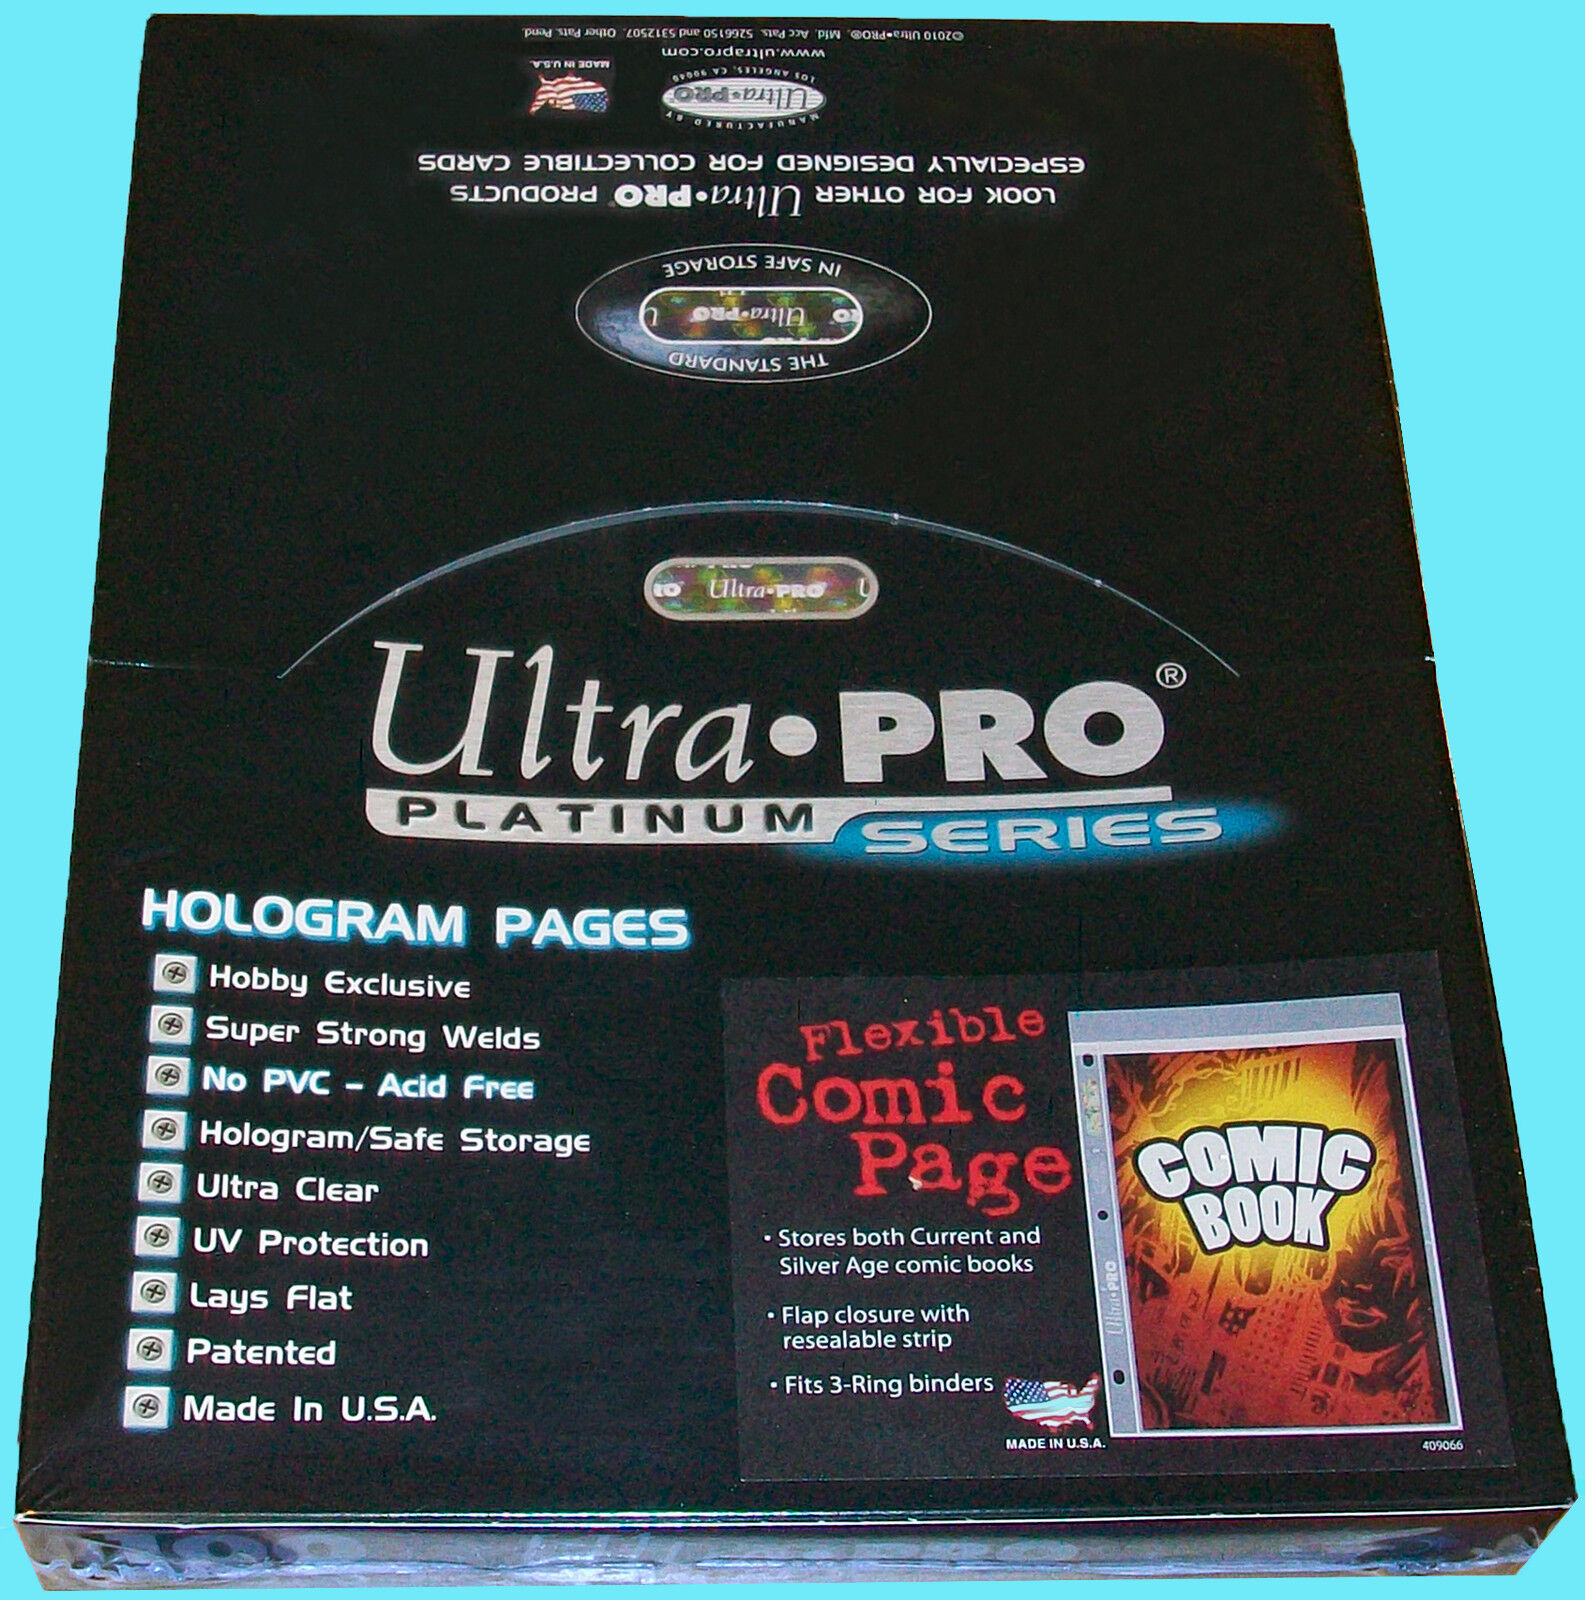 100 Ultra Pro Platinum COMIC BOOK Flexible Pocket PAGES Resealable Binder 3 Ring